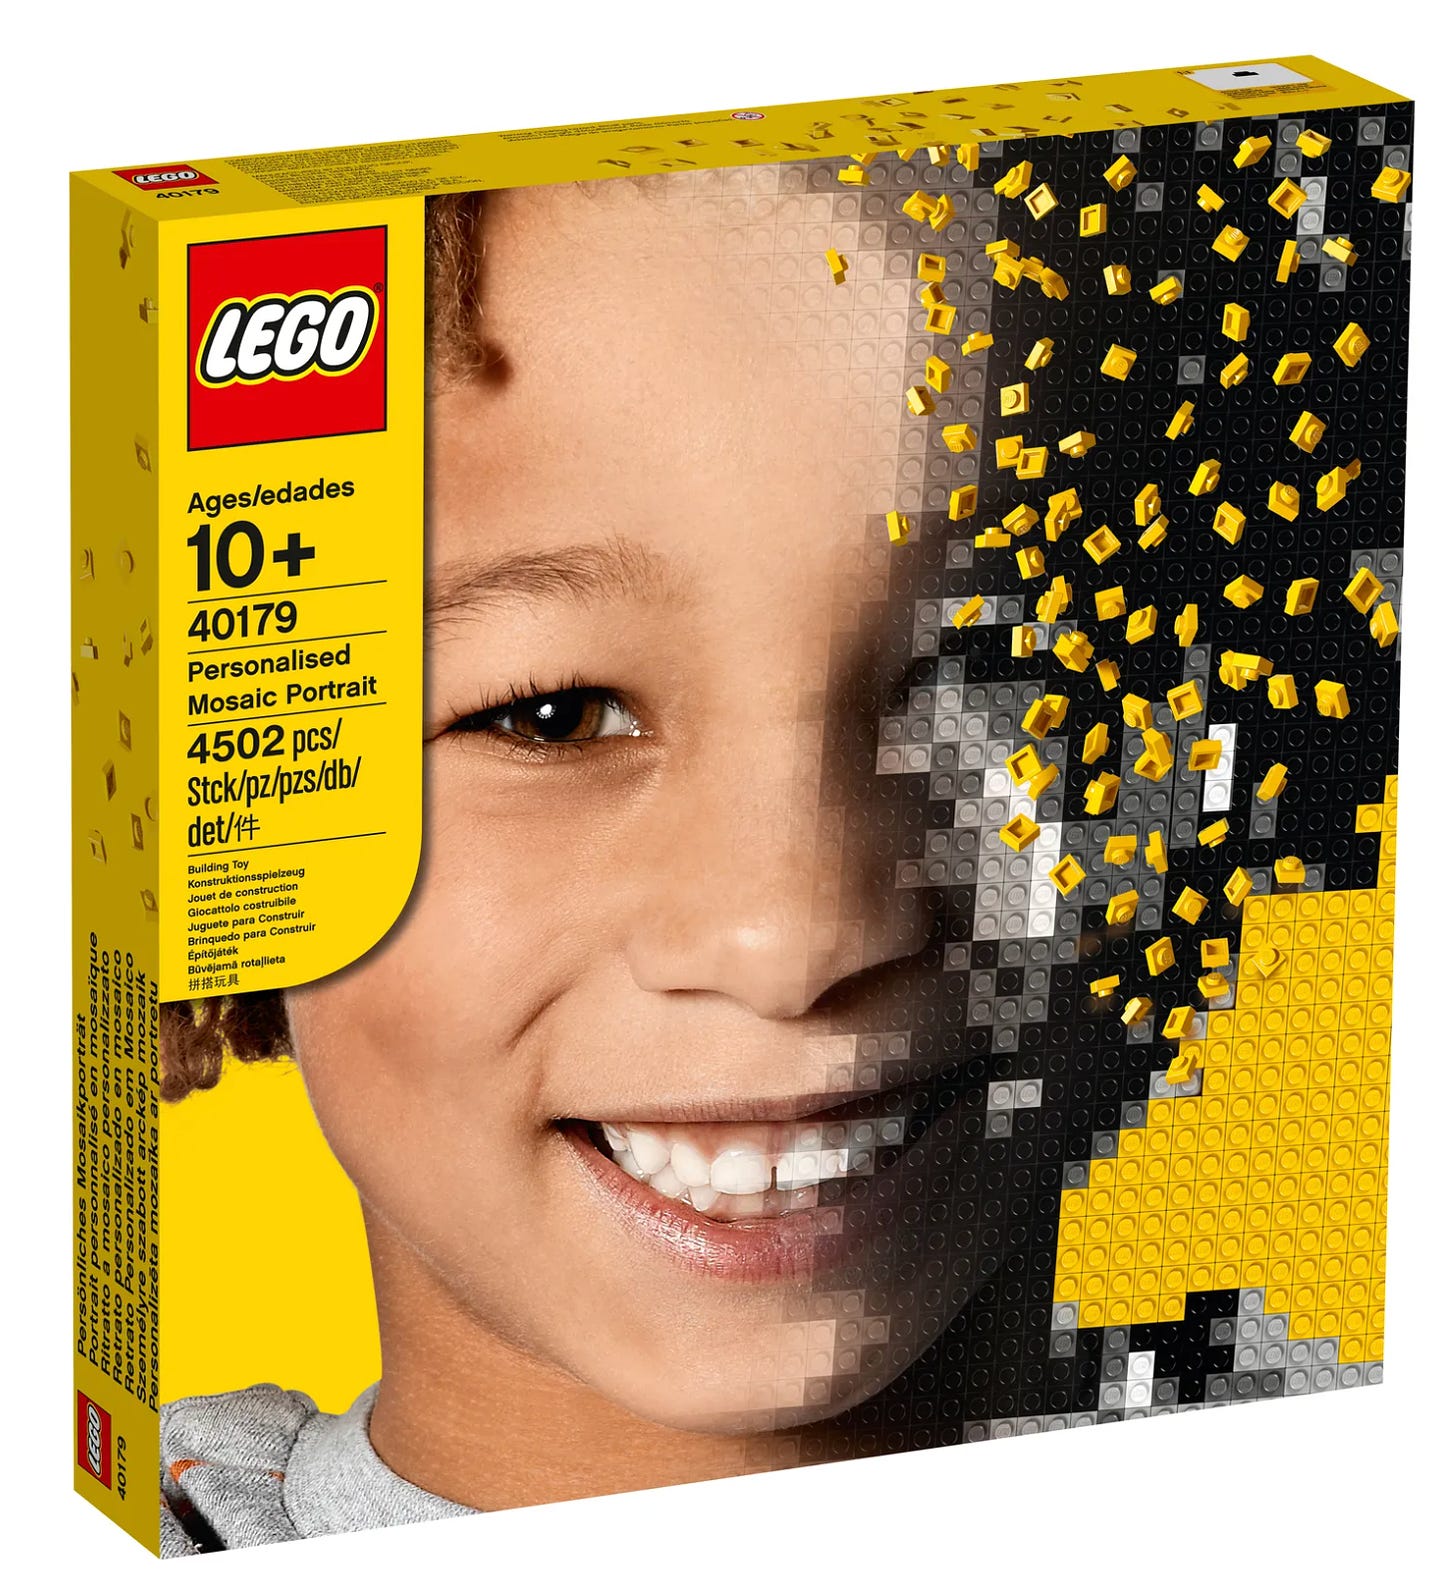 Box for LEGO's personalised mosaic portrait product